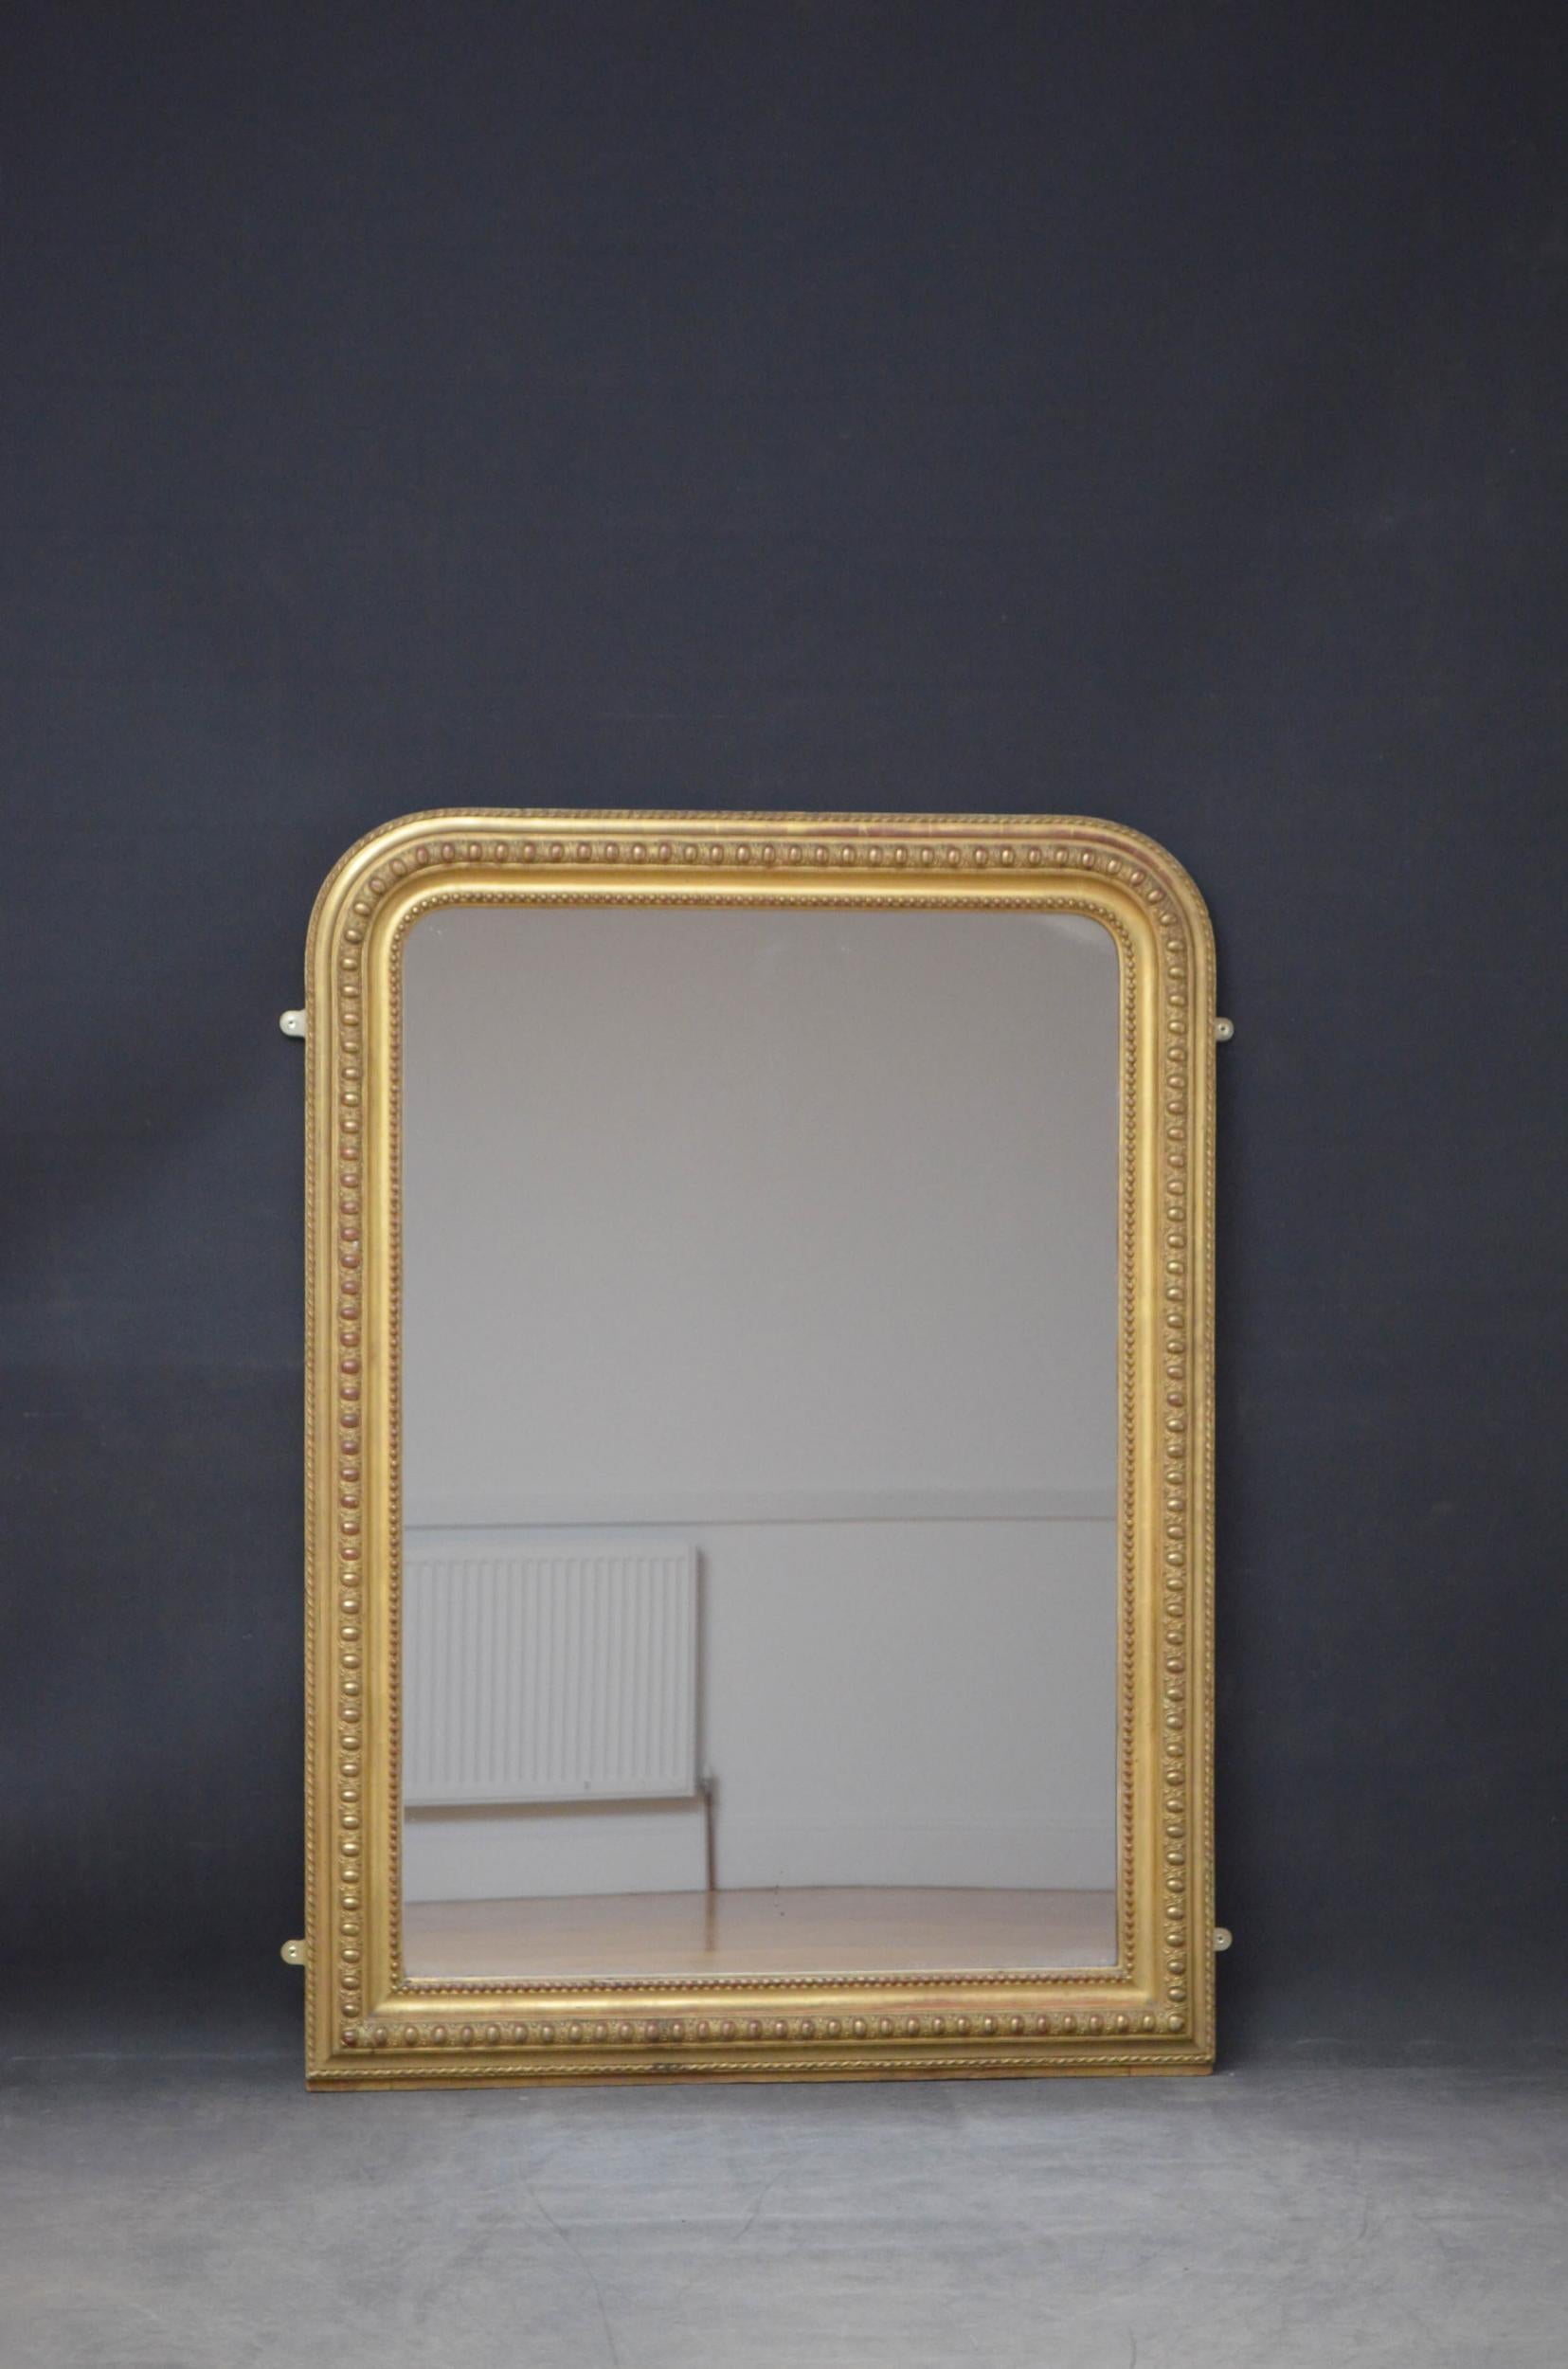 Sn4872 a 19th century giltwood mirror, having original glass with some imperfections in beaded and gadrooned and carved gilded frame. This antique mirror retains its original glass, gilt and backboards all in fantastic home ready condition, circa